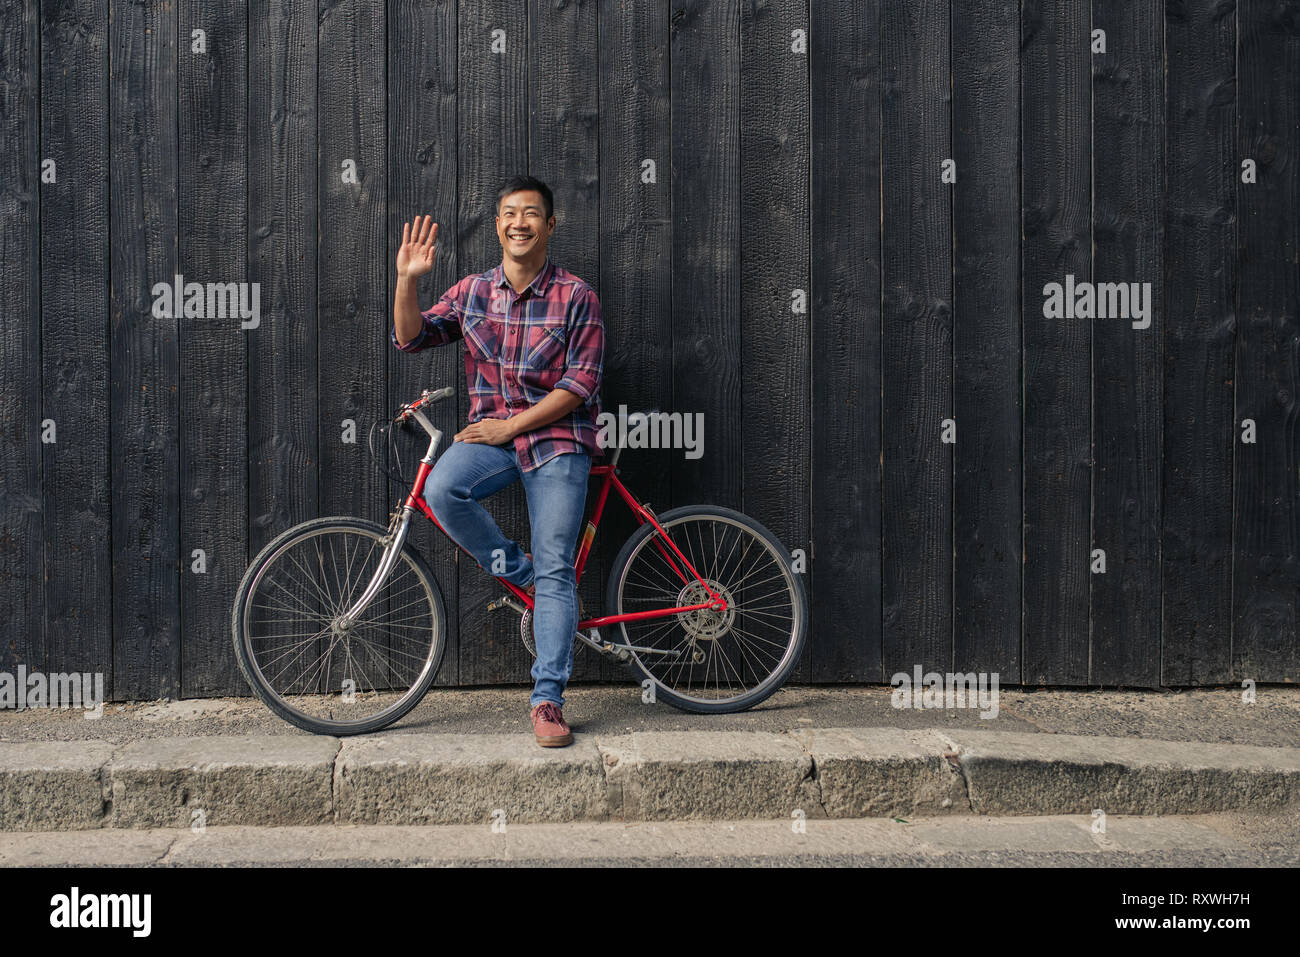 Smiling young man with a bicycle waving hello Stock Photo